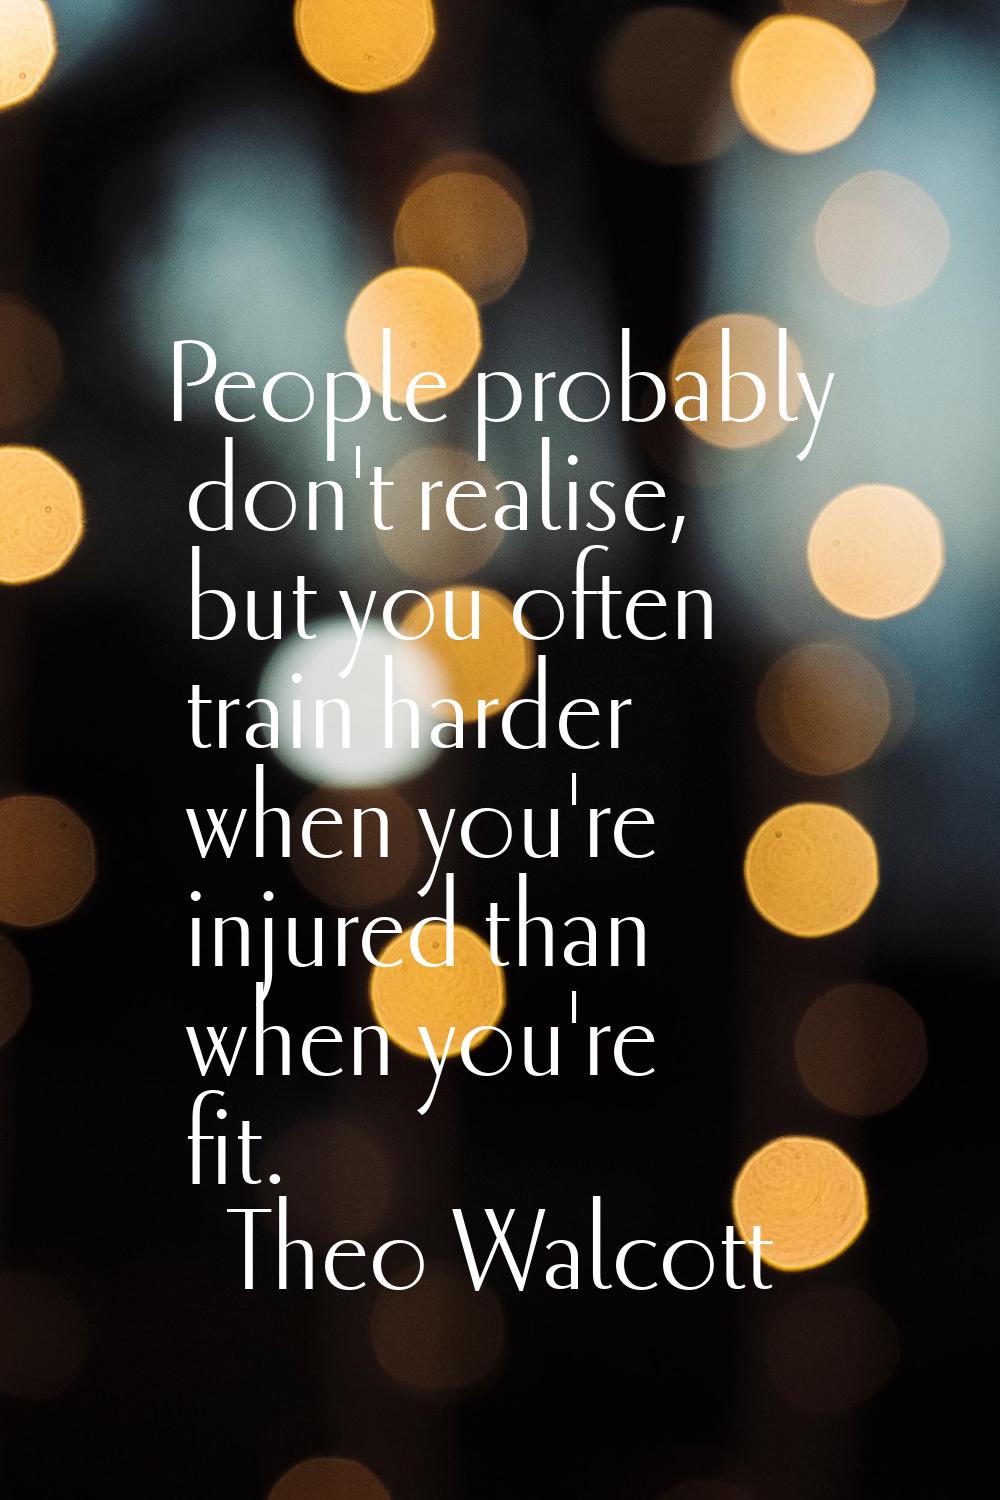 People probably don't realise, but you often train harder when you're injured than when you're fit.